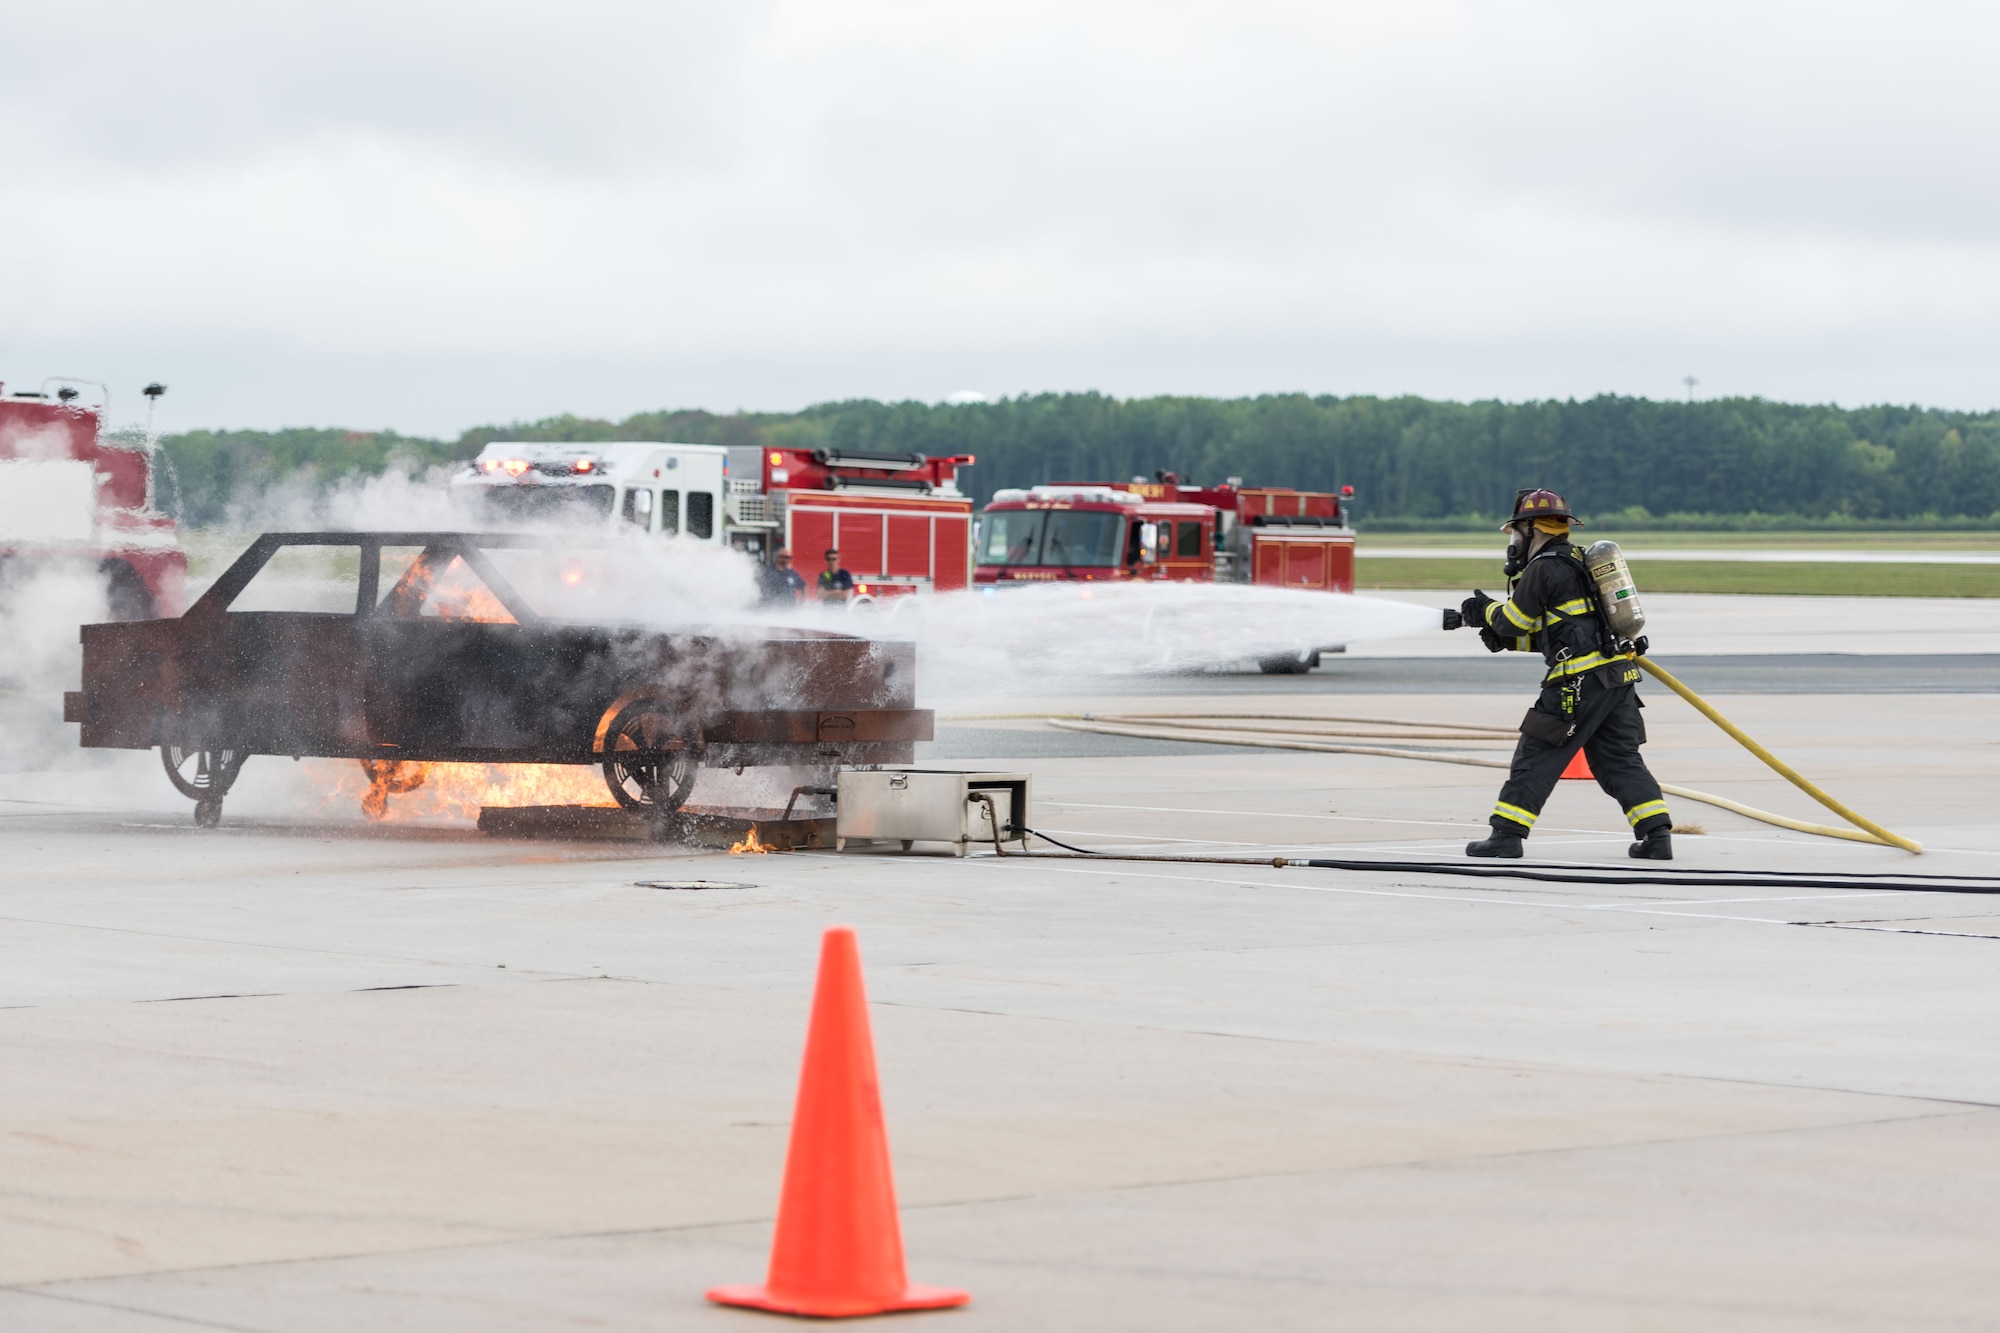 Dover Air Force Base and local civilian first responders assist simulated casualties while reacting to a simulated aircraft accident during a Major Accident Response Exercise Aug. 17, 2019, at  Dover AFB, Del. Multiple Dover AFB units and off-base community partners worked hand-in-hand throughout the exercise in preparation for the upcoming Air Show and Open House, Sept. 14-15. (U.S. Air Force photo by Staff Sgt. Damien Taylor)